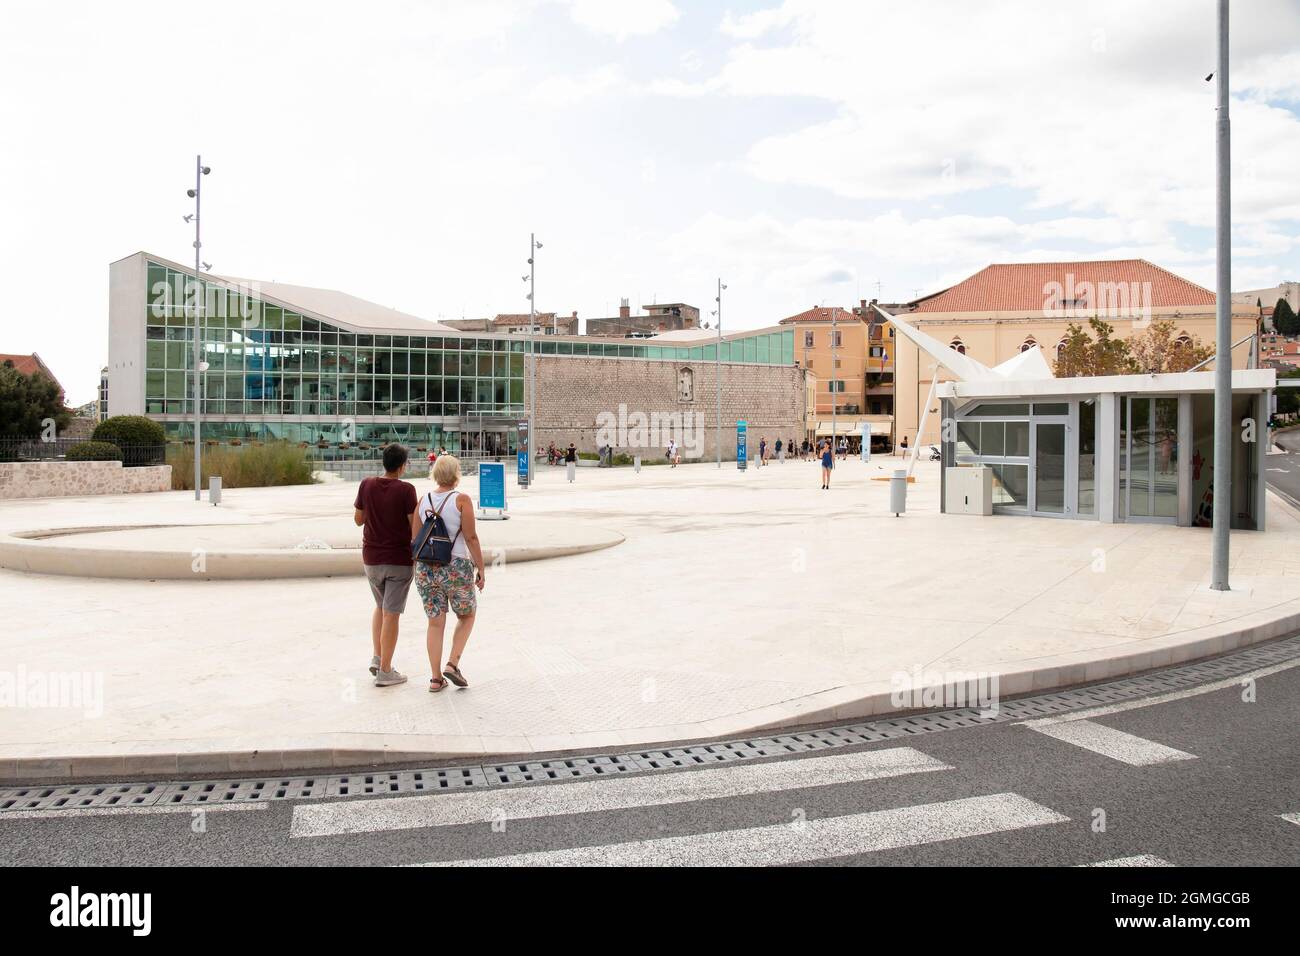 Sibenik, Croatia - August 25, 2021: City square in front of old town, with stone and glass public library building and underground garage entrance Stock Photo